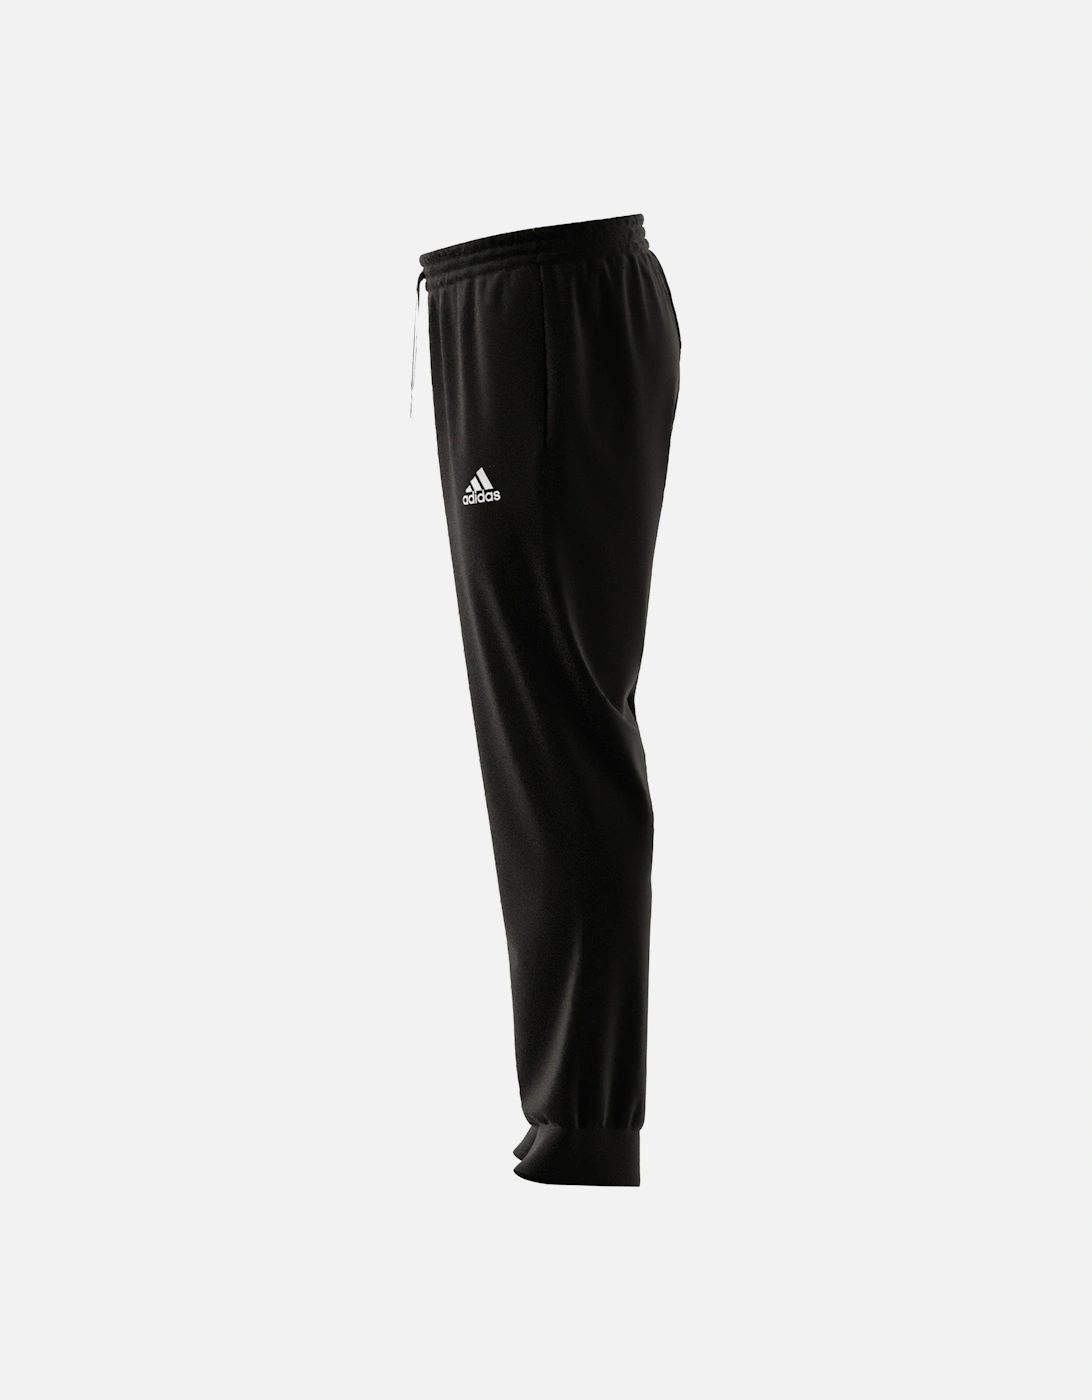 Mens Stanford Woven Cuffed Pant (Black)